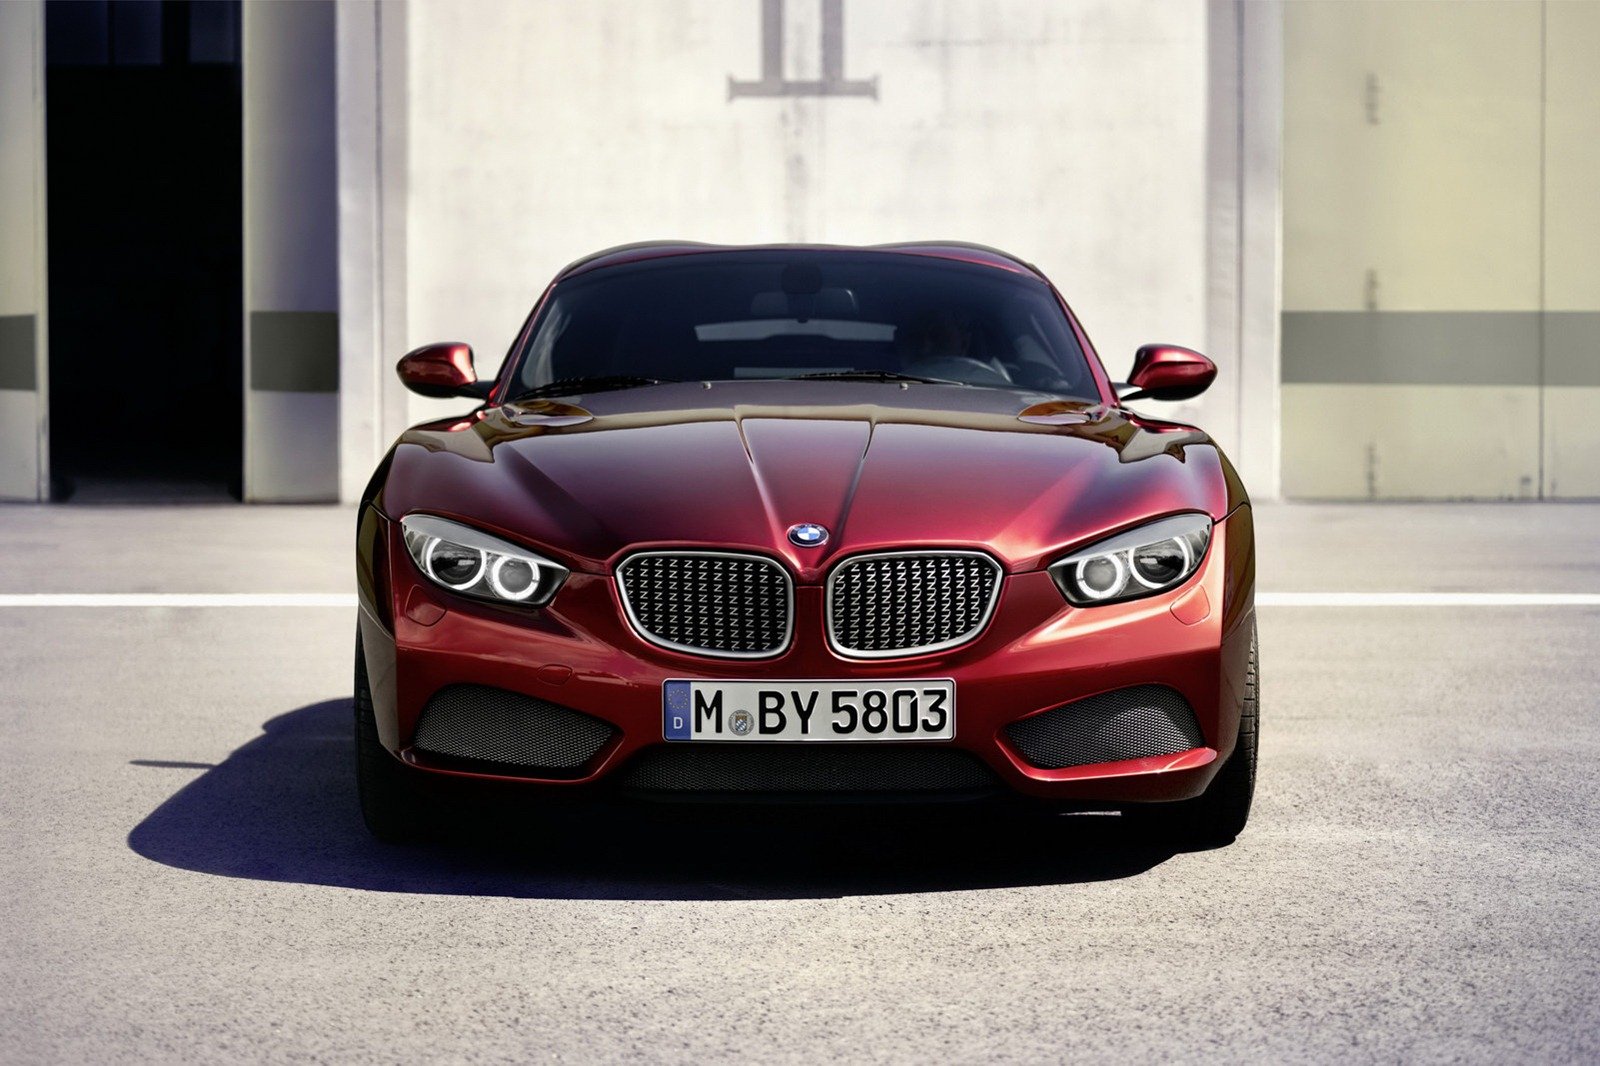 Bmw z4 coupe promotional video #6